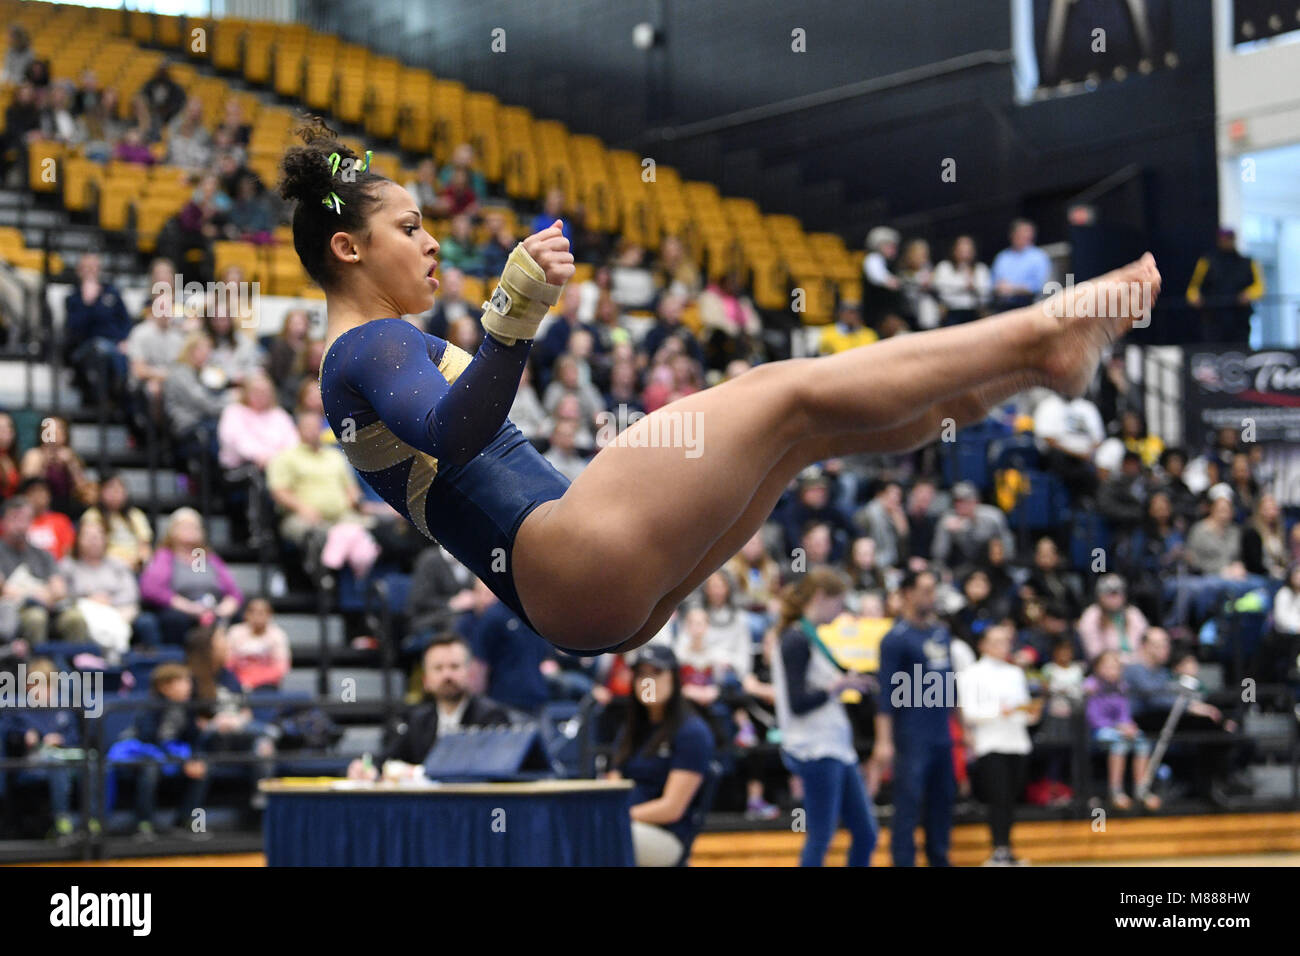 March 11, 2017 - Washington, District of Columbia, U.S - WVU gymnast ERICA FONTAINE competes on floor exercise during a tri-meet hosted by GWU in Washington, DC. (Credit Image: © Ken Inness via ZUMA Wire) Stock Photo